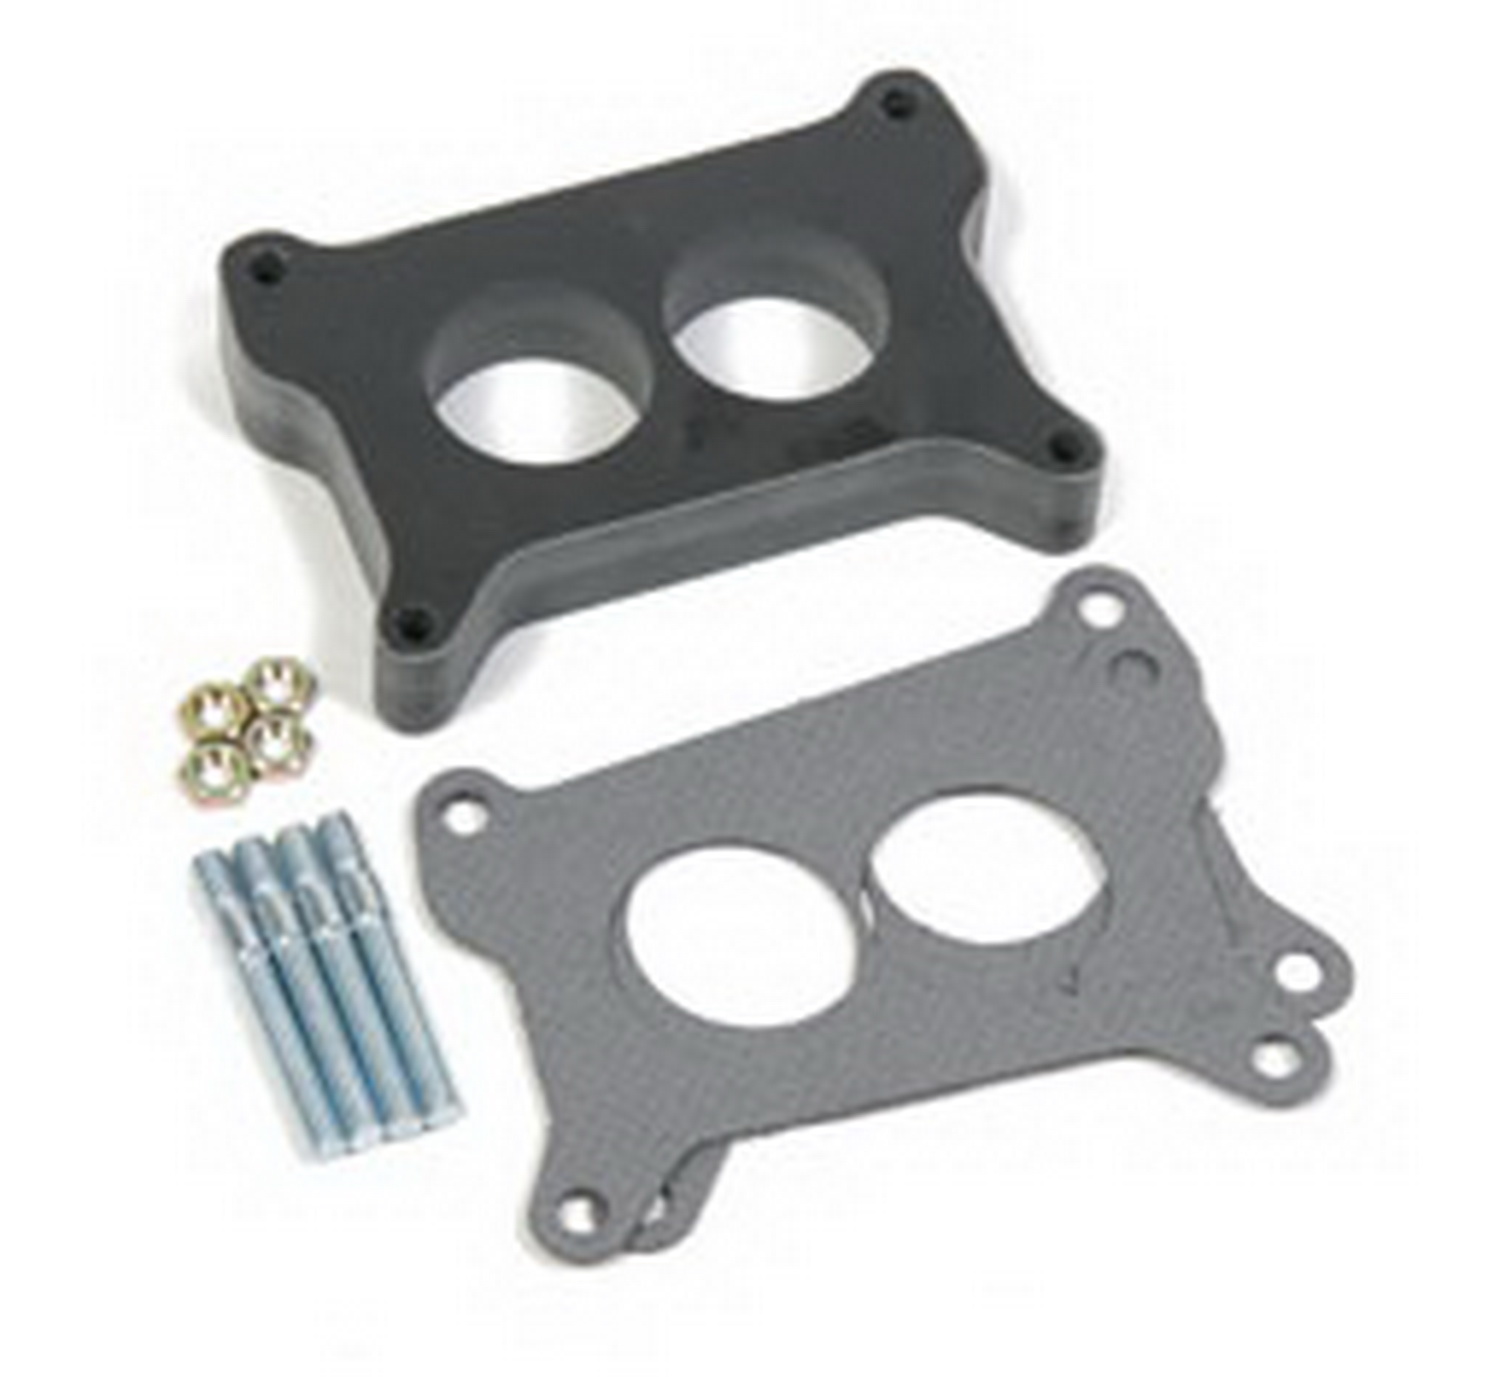 Holley Performance Holley Performance 17-72 Carburetor Adapter